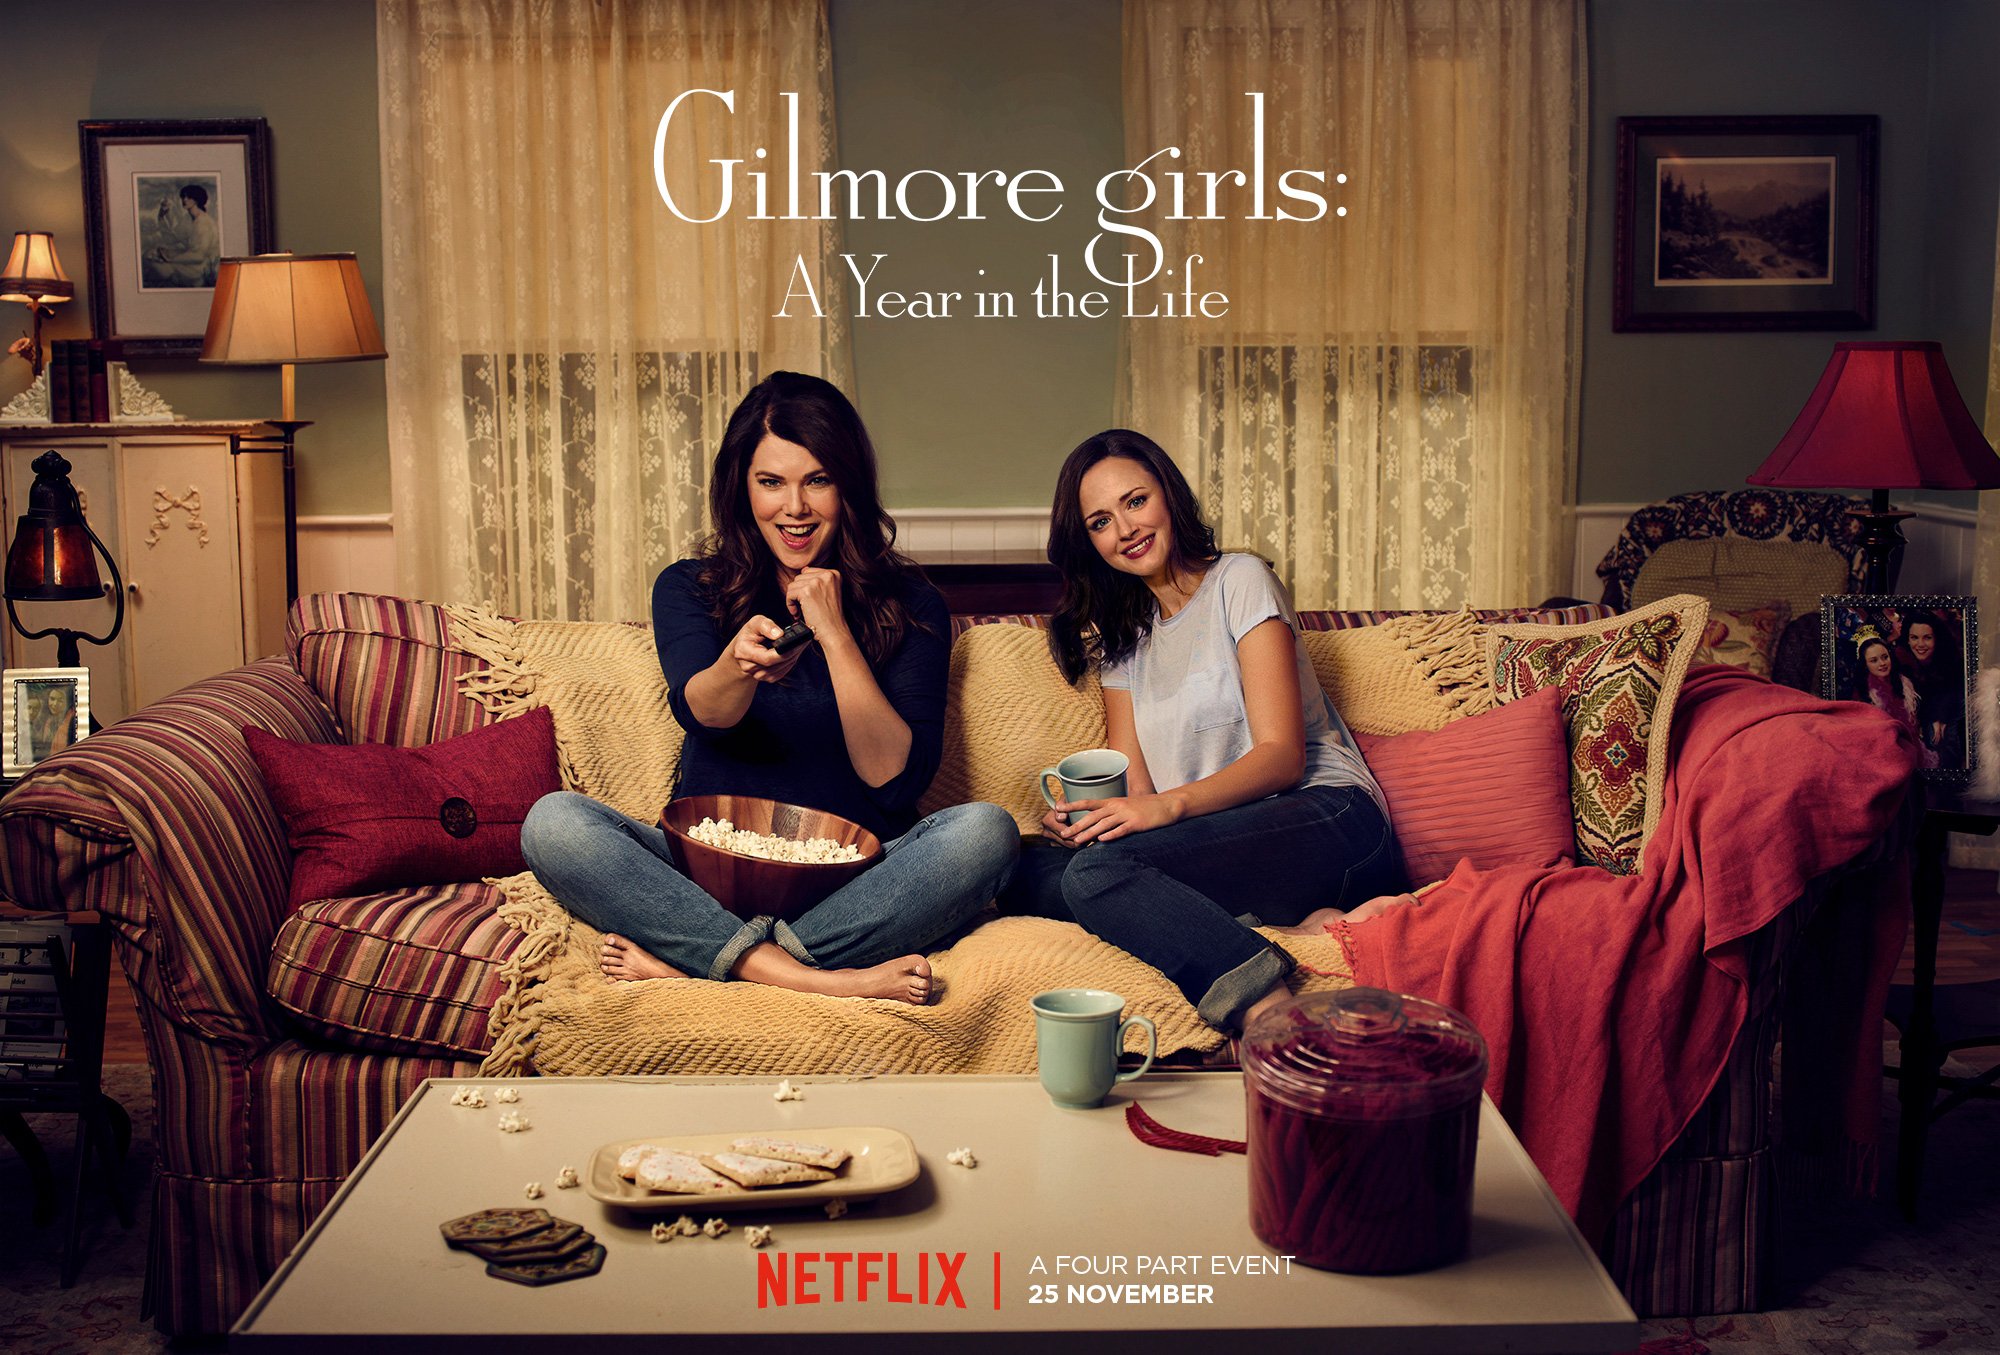 Lauren Graham as Lorelai Gilmore and Alexis Bledel as Rory Gilmore sit on a couch together in a promotional poster for 'Gilmore Girls; A Year in the Life'